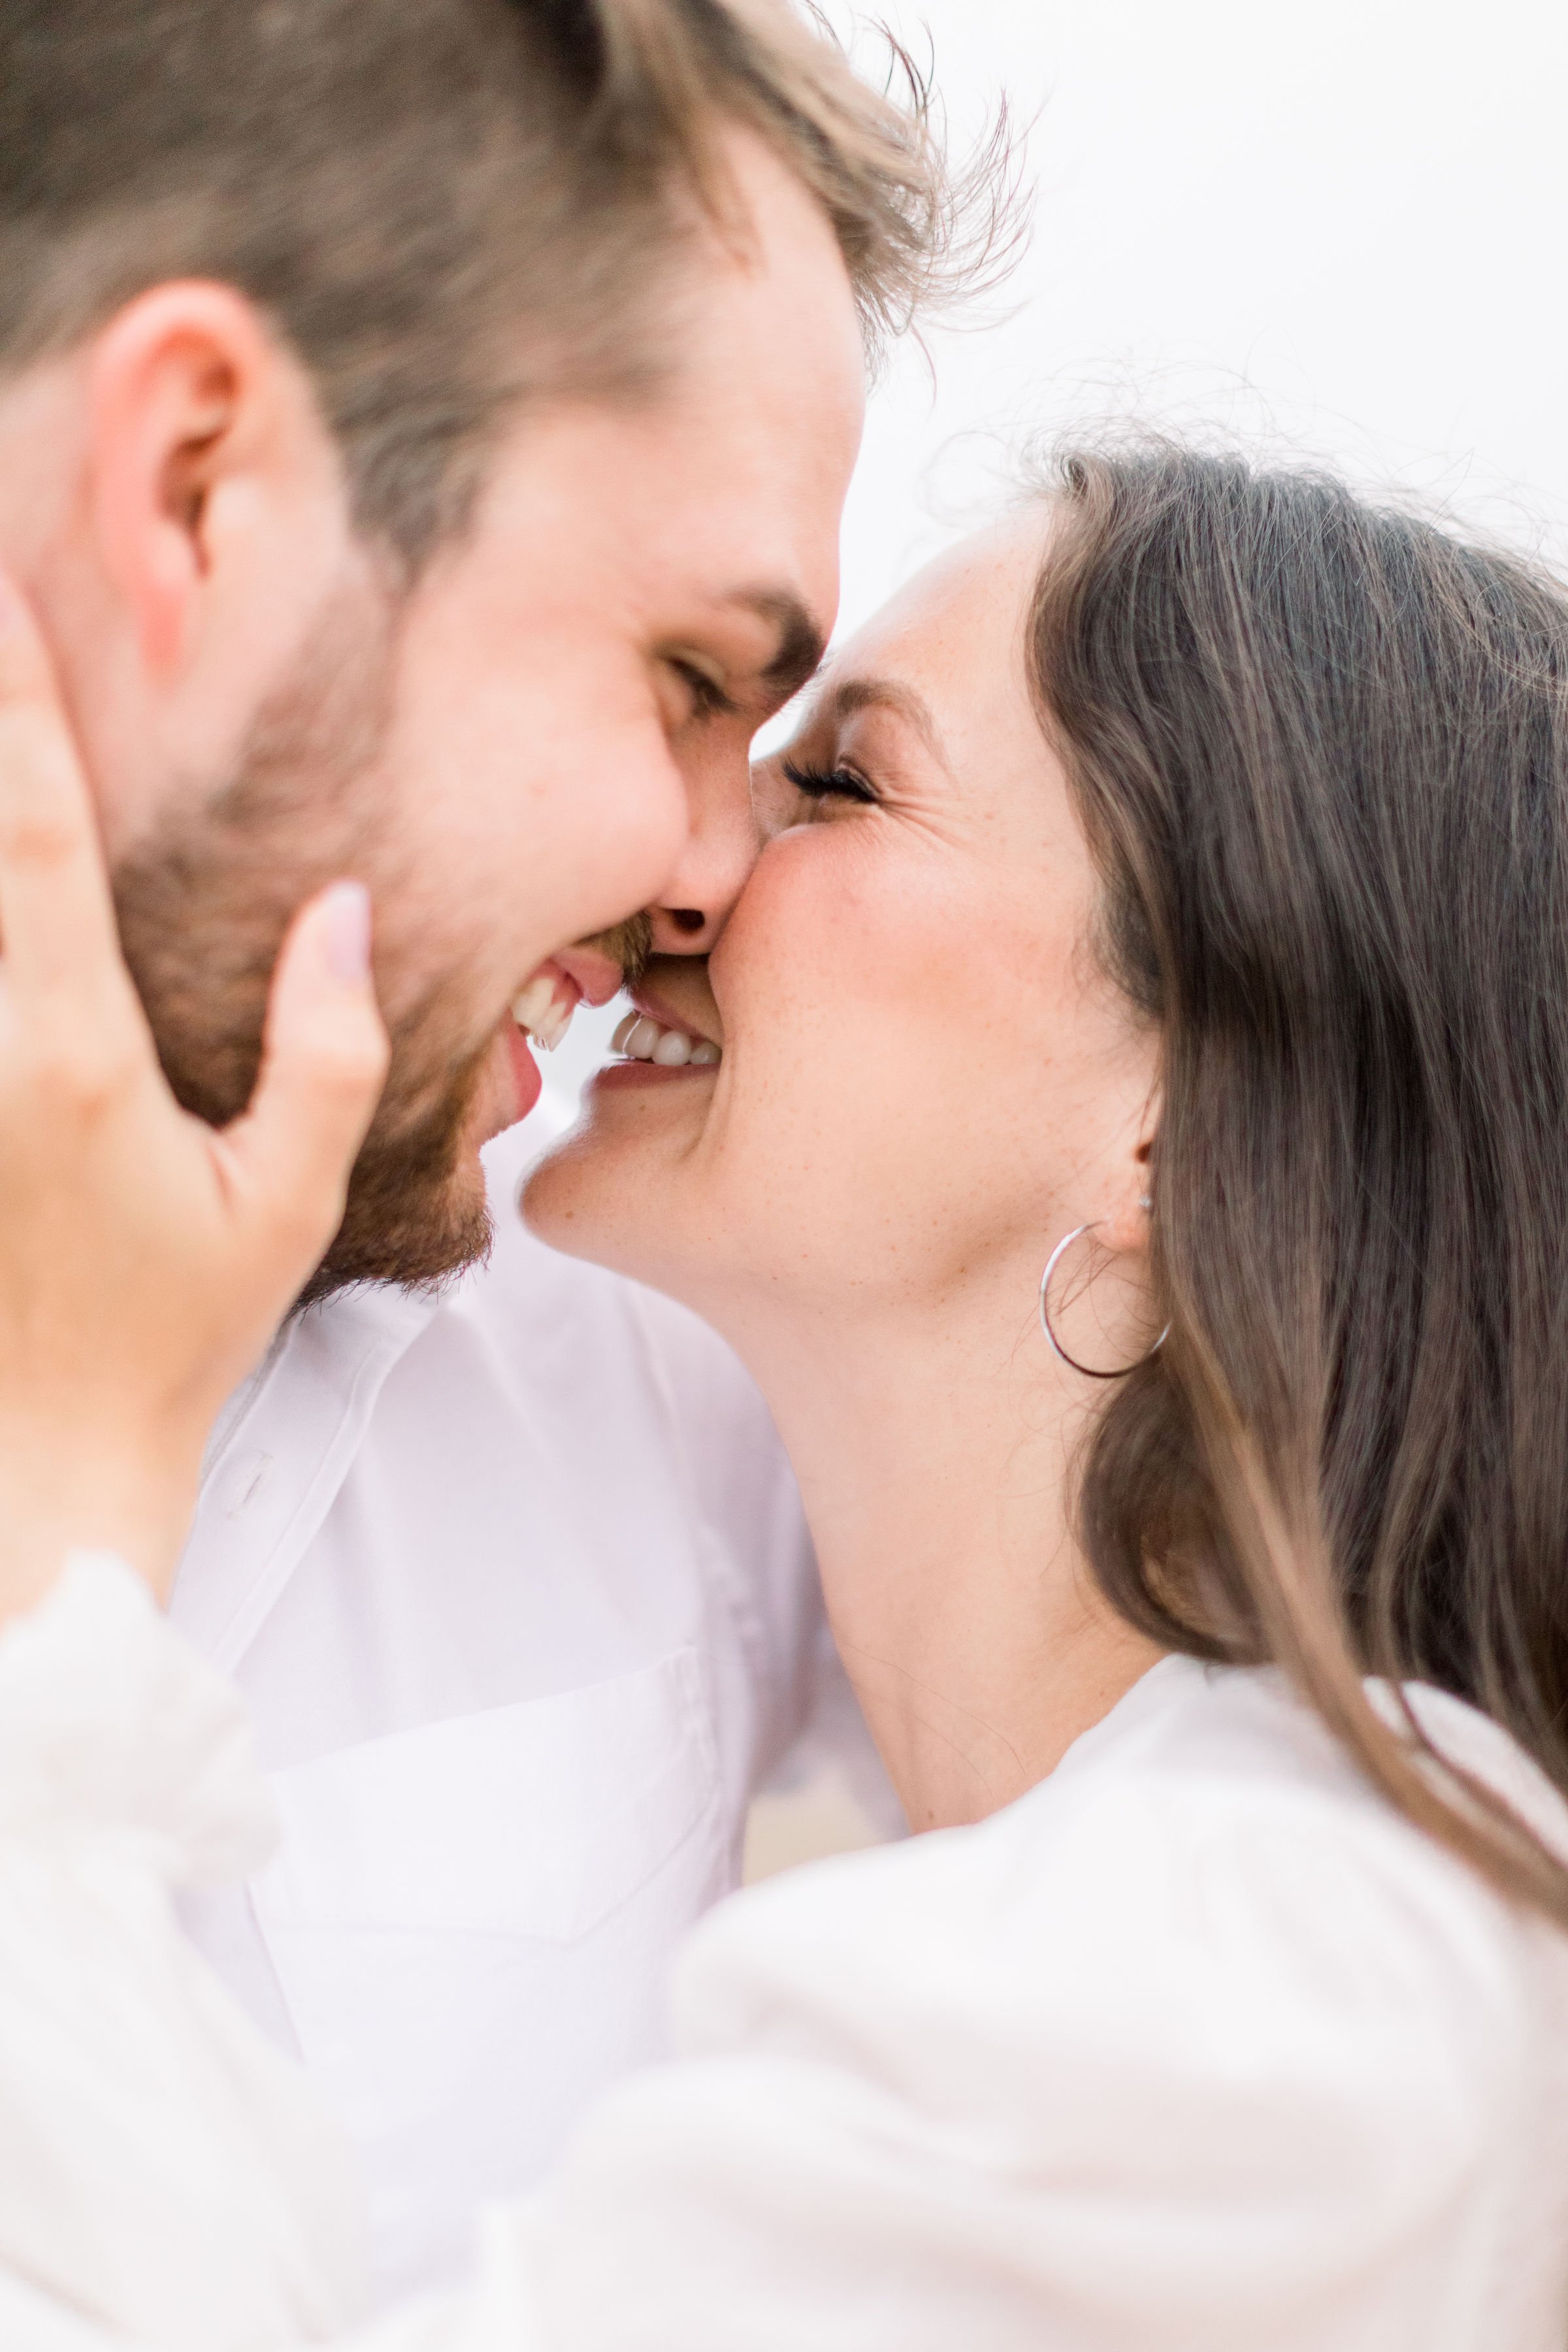  In Ontario, an engaged couple smiles while kissing one another by Chelsea Mason Photography. kissing laughing bright airy #Kingstonengagement #GrassCreekParkPortraits #Ontarioengagementphotographers #Chelseamasonphotography #Chelseamasonengagements 